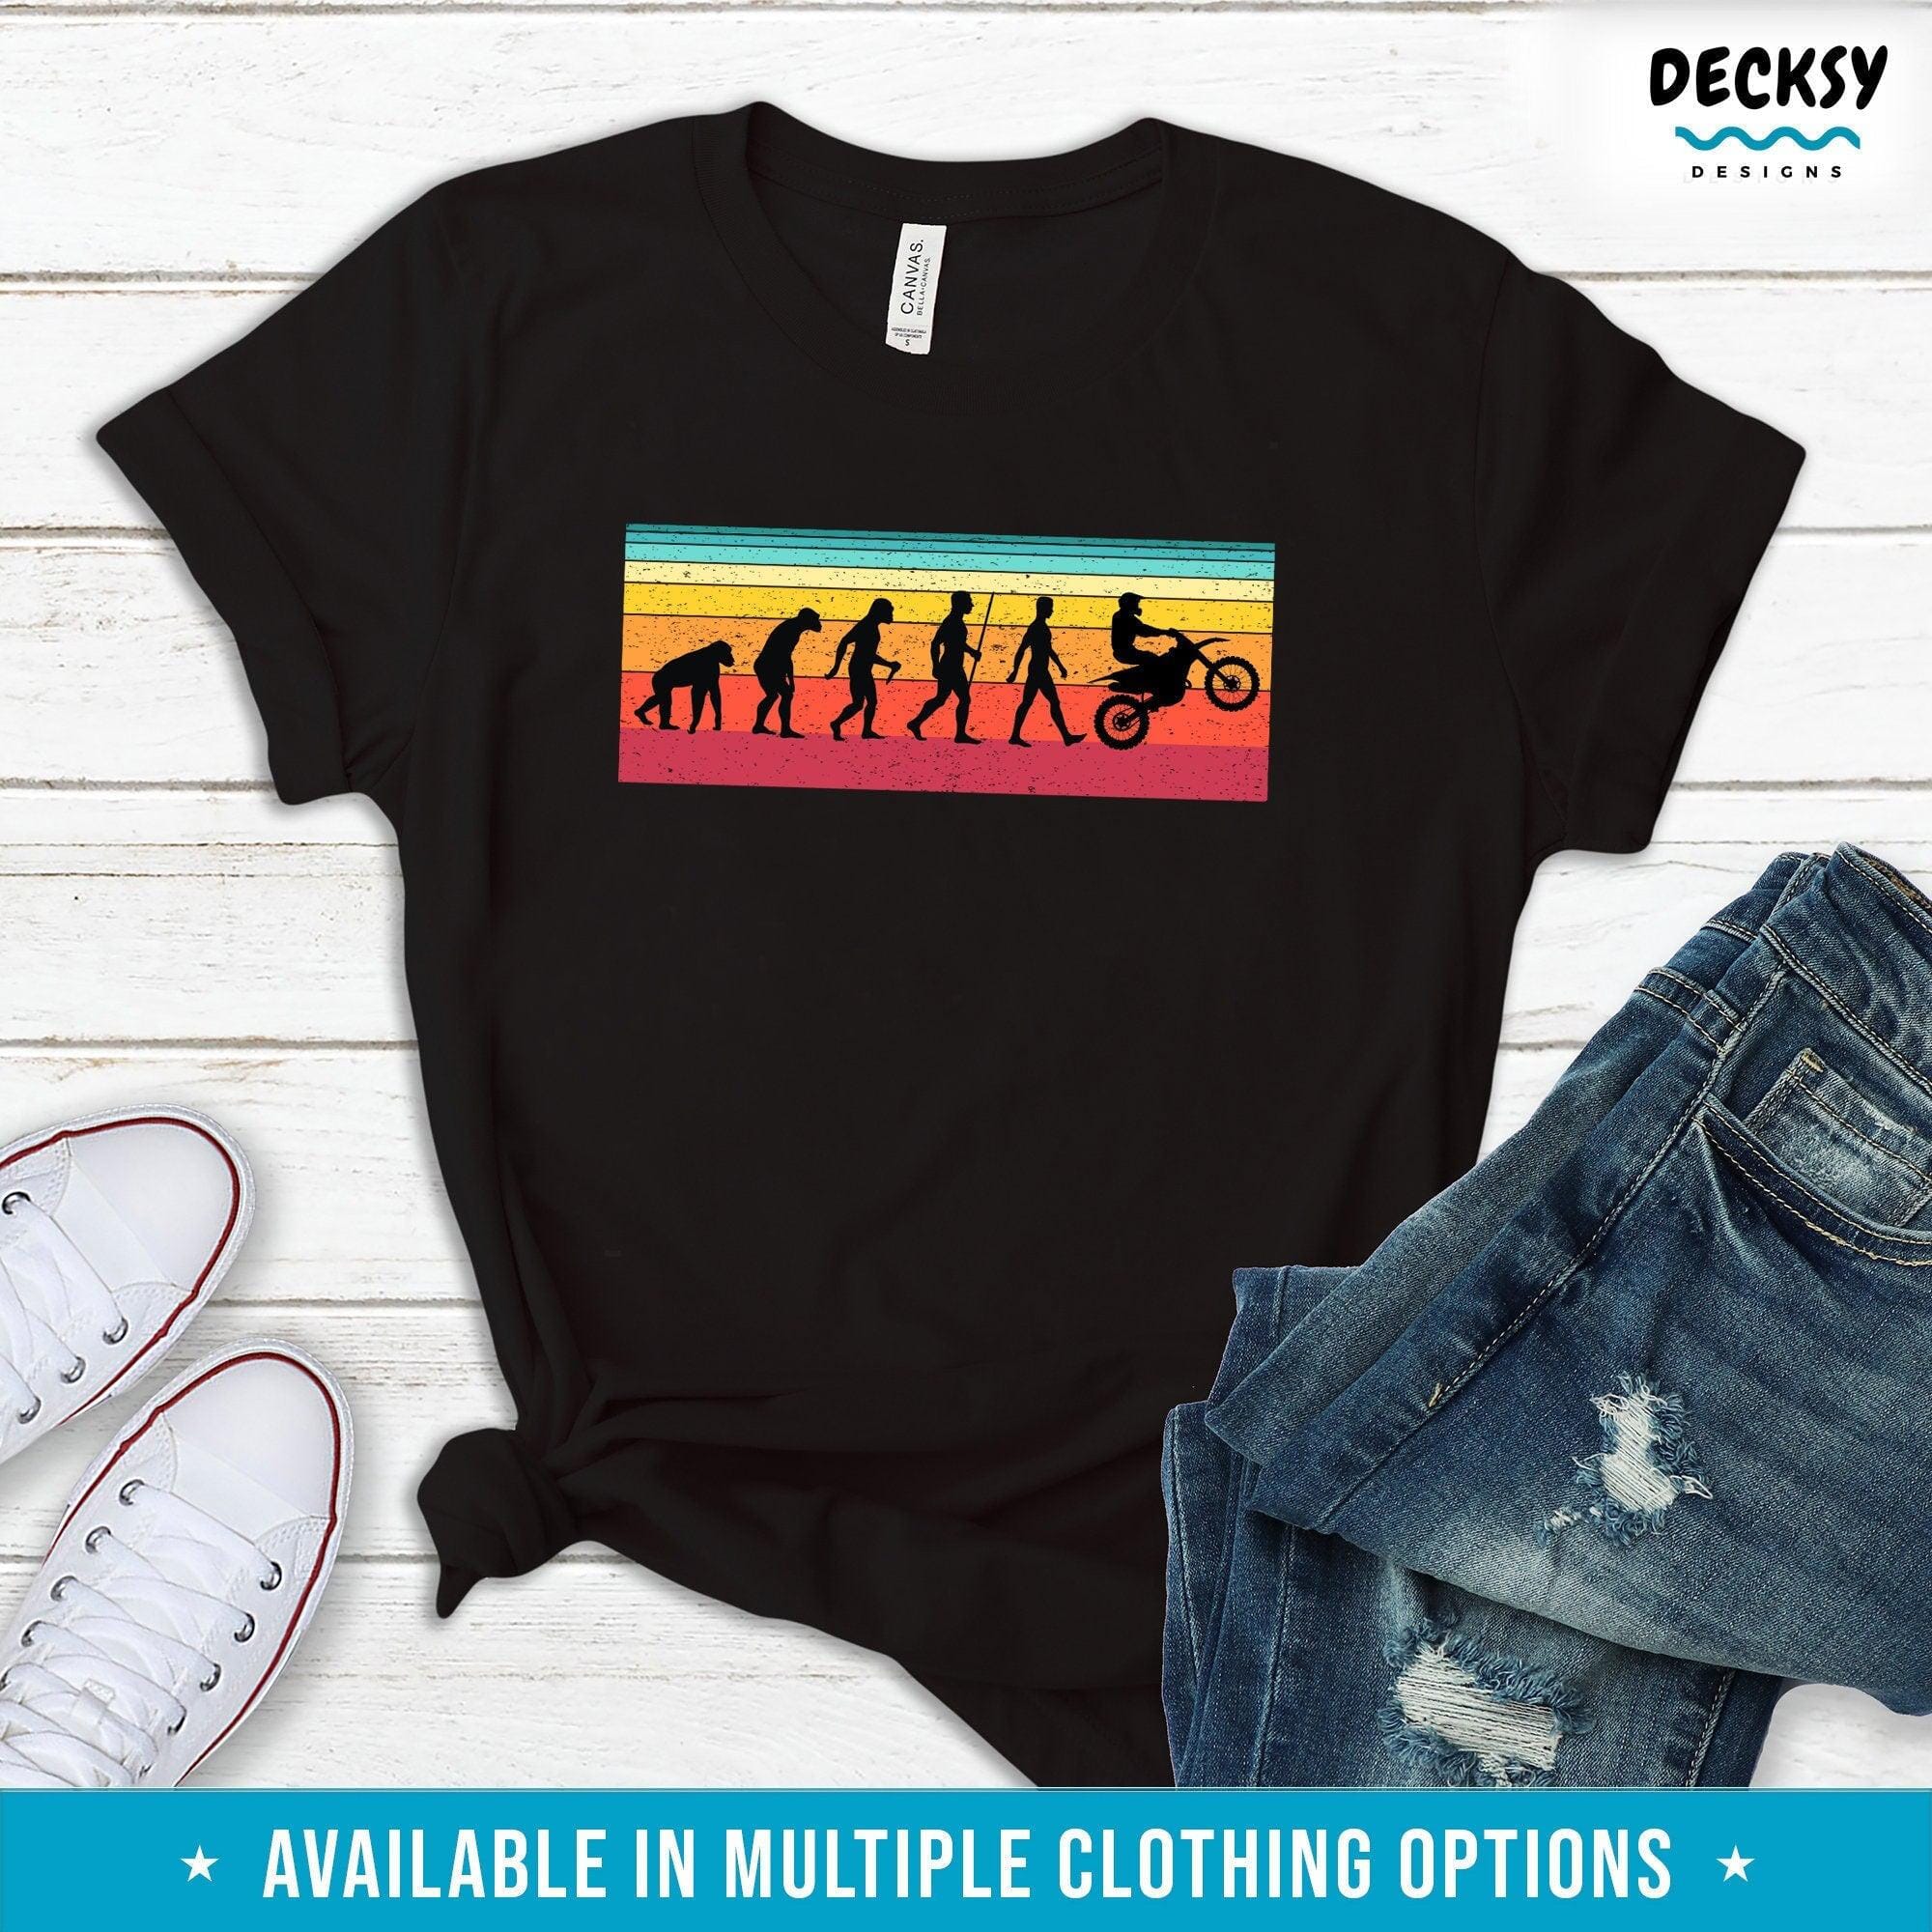 Dirt Bike Shirt, Funny Bike Rider Gift-Clothing:Gender-Neutral Adult Clothing:Tops & Tees:T-shirts:Graphic Tees-DecksyDesigns